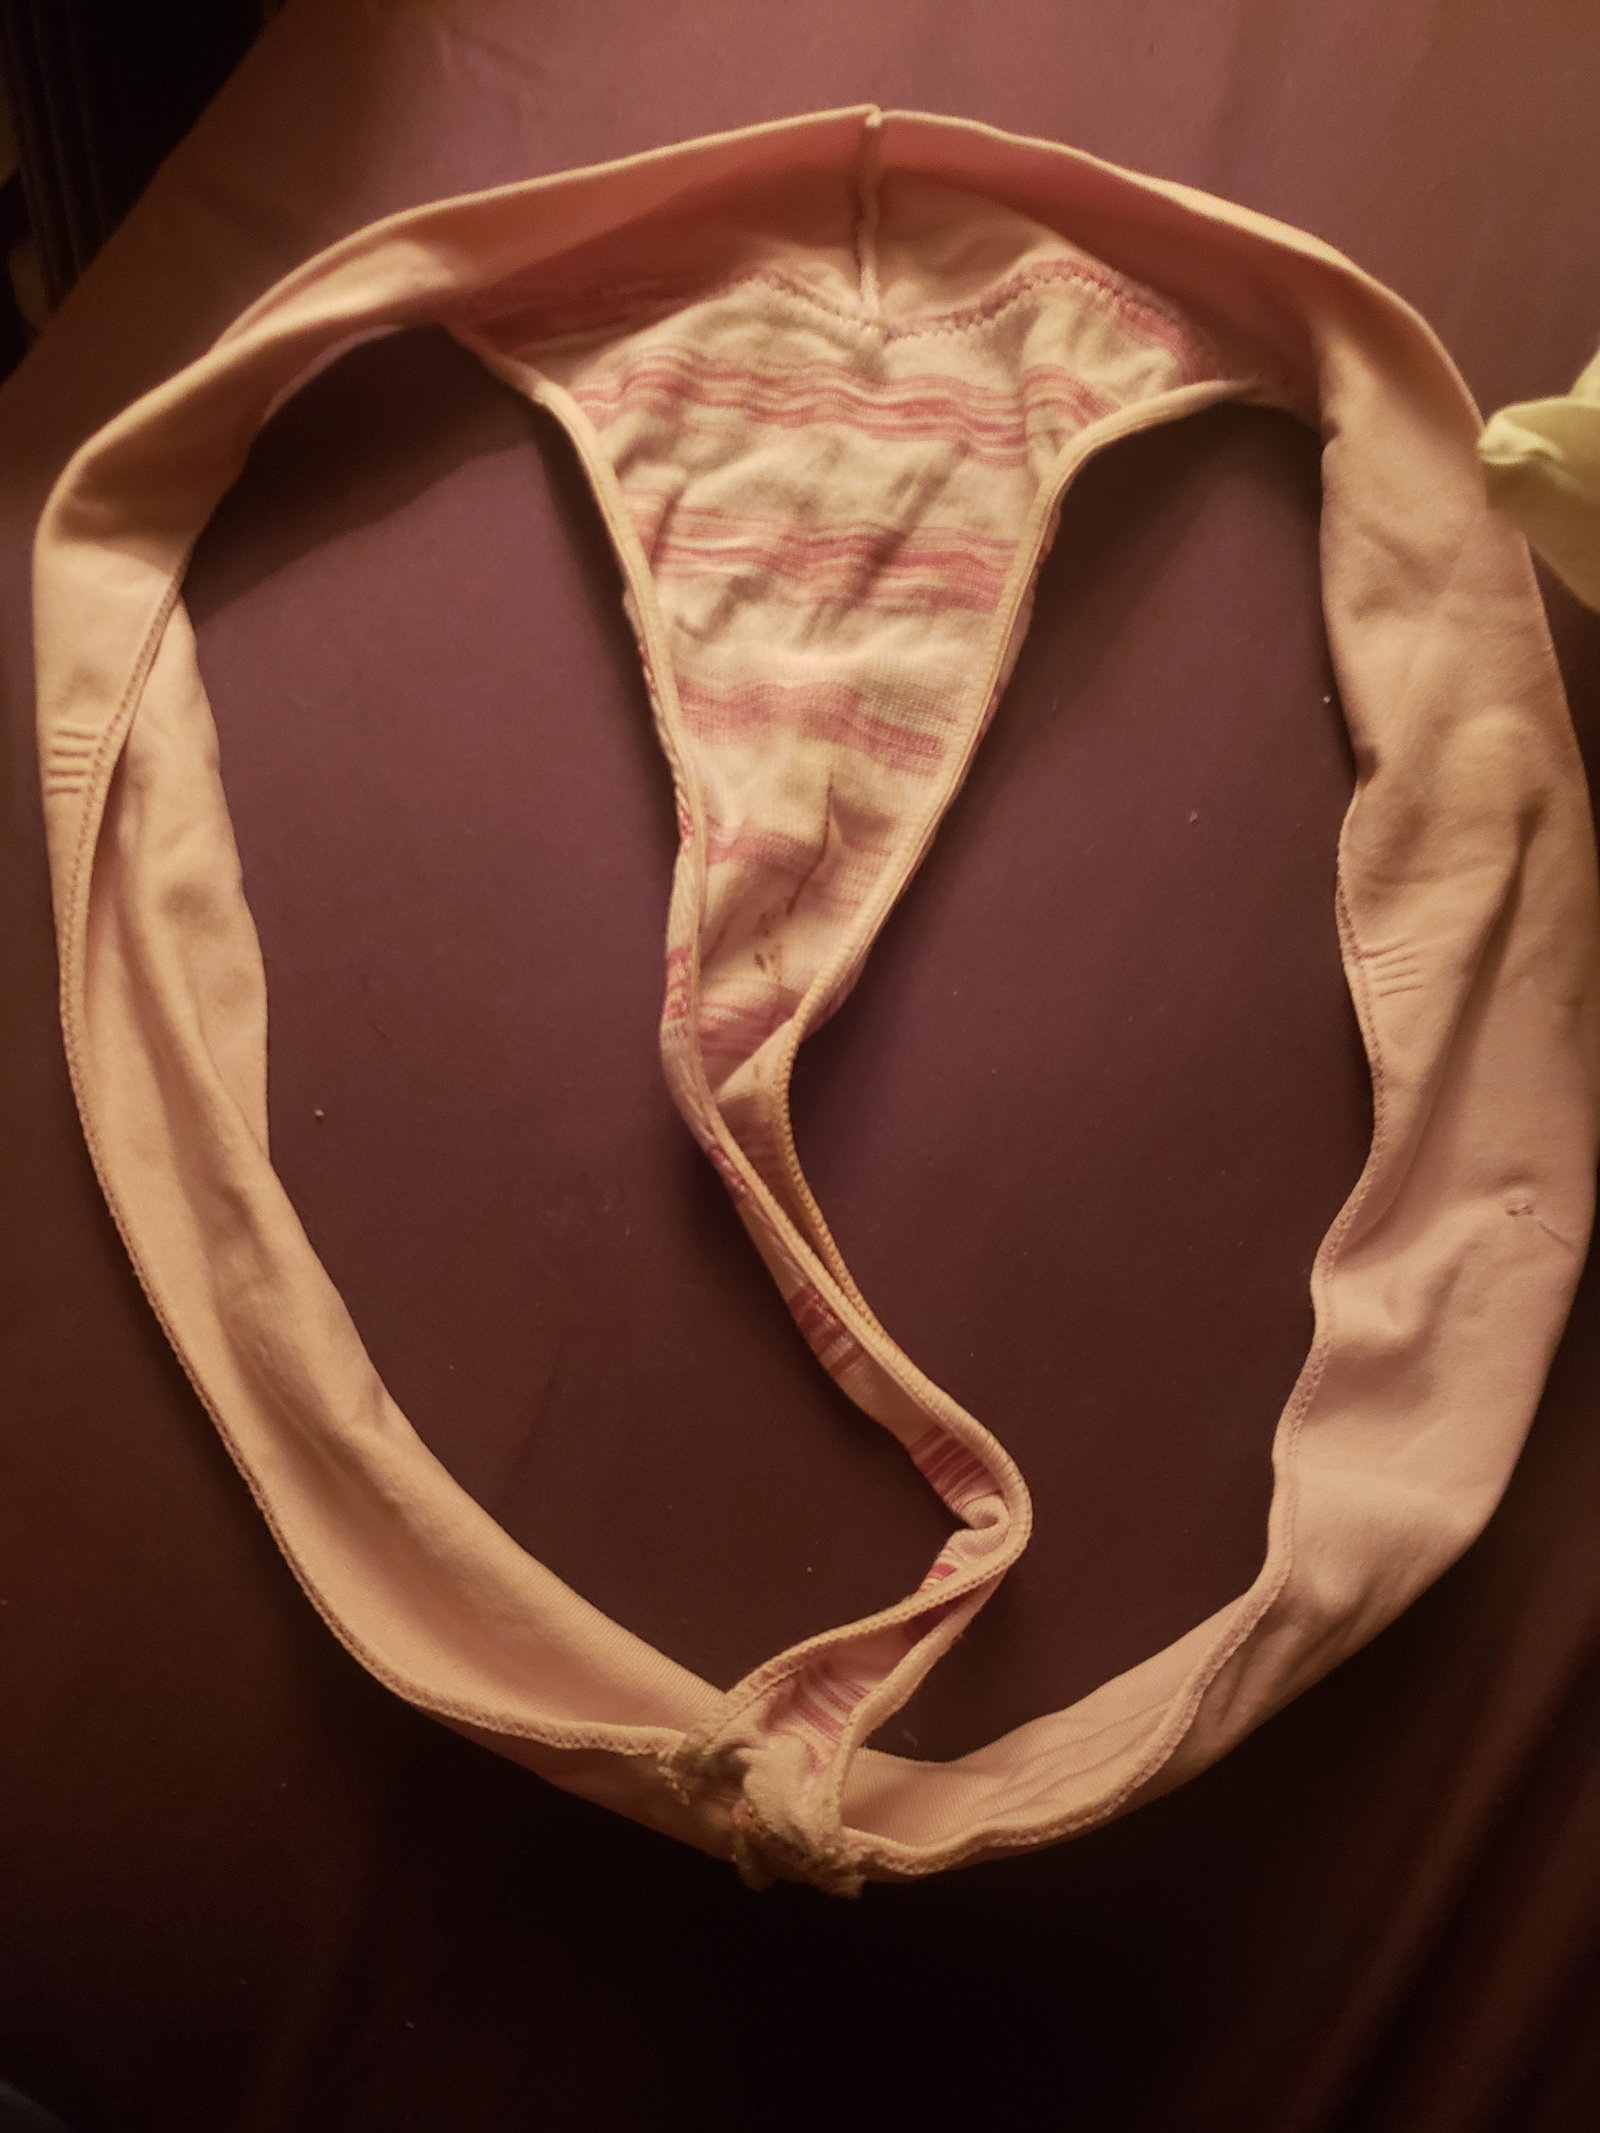 Photo by EnormuscocK with the username @EnormuscocK,  October 2, 2019 at 1:01 AM. The post is about the topic Panties fetish and the text says 'snagged this dirty pair. My buddys sisters friend'